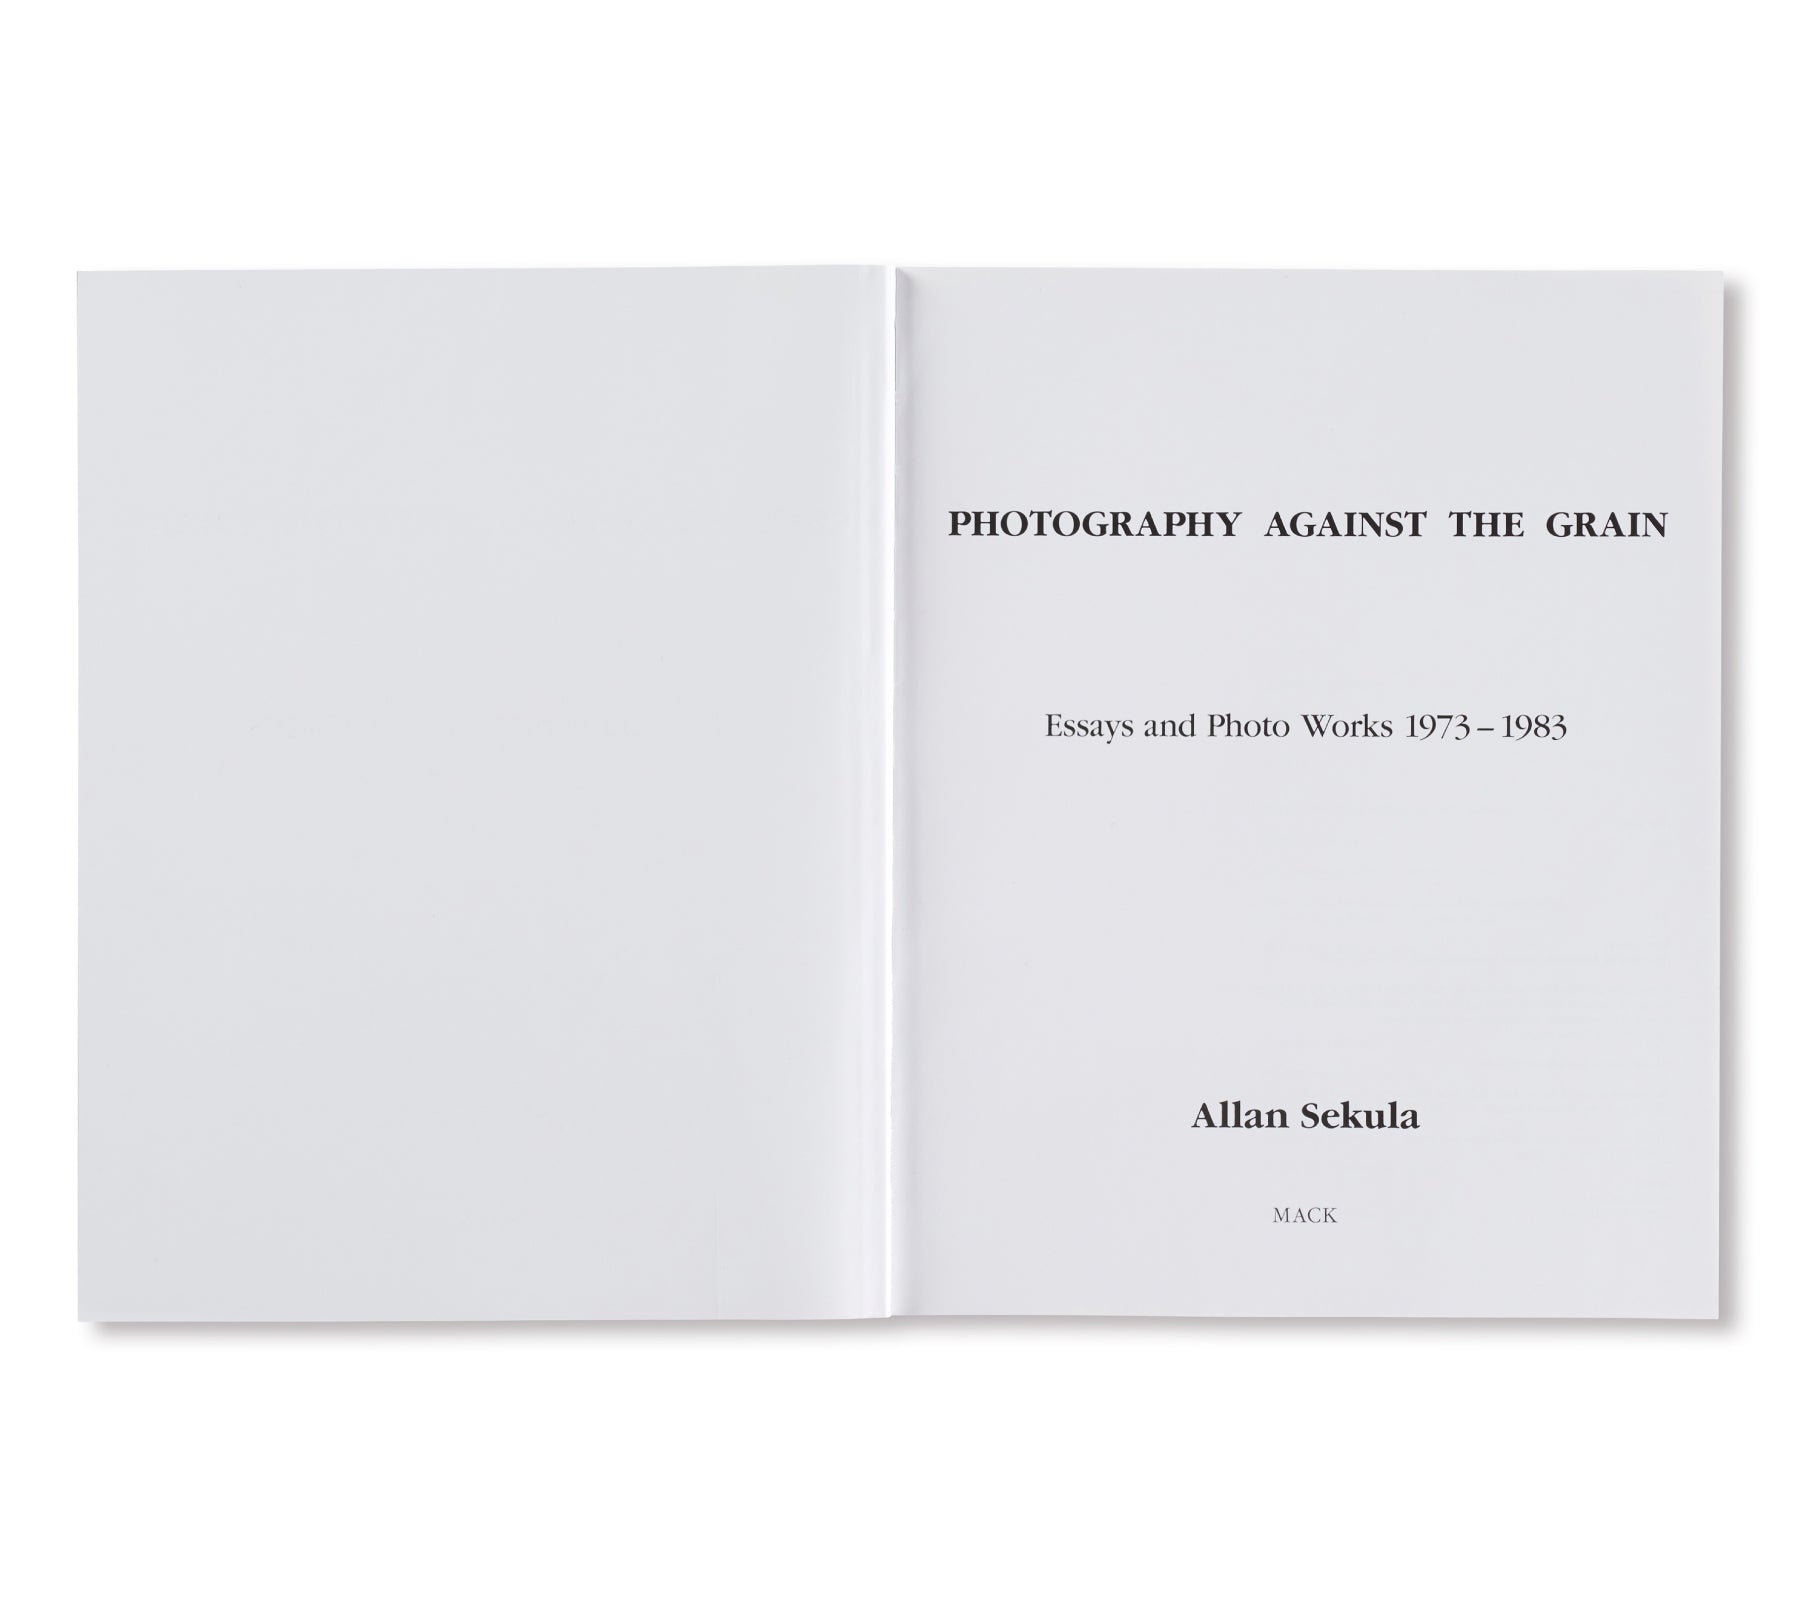 PHOTOGRAPHY AGAINST THE GRAIN: ESSAYS AND PHOTO WORKS, 1973–1983 by Allan Sekula